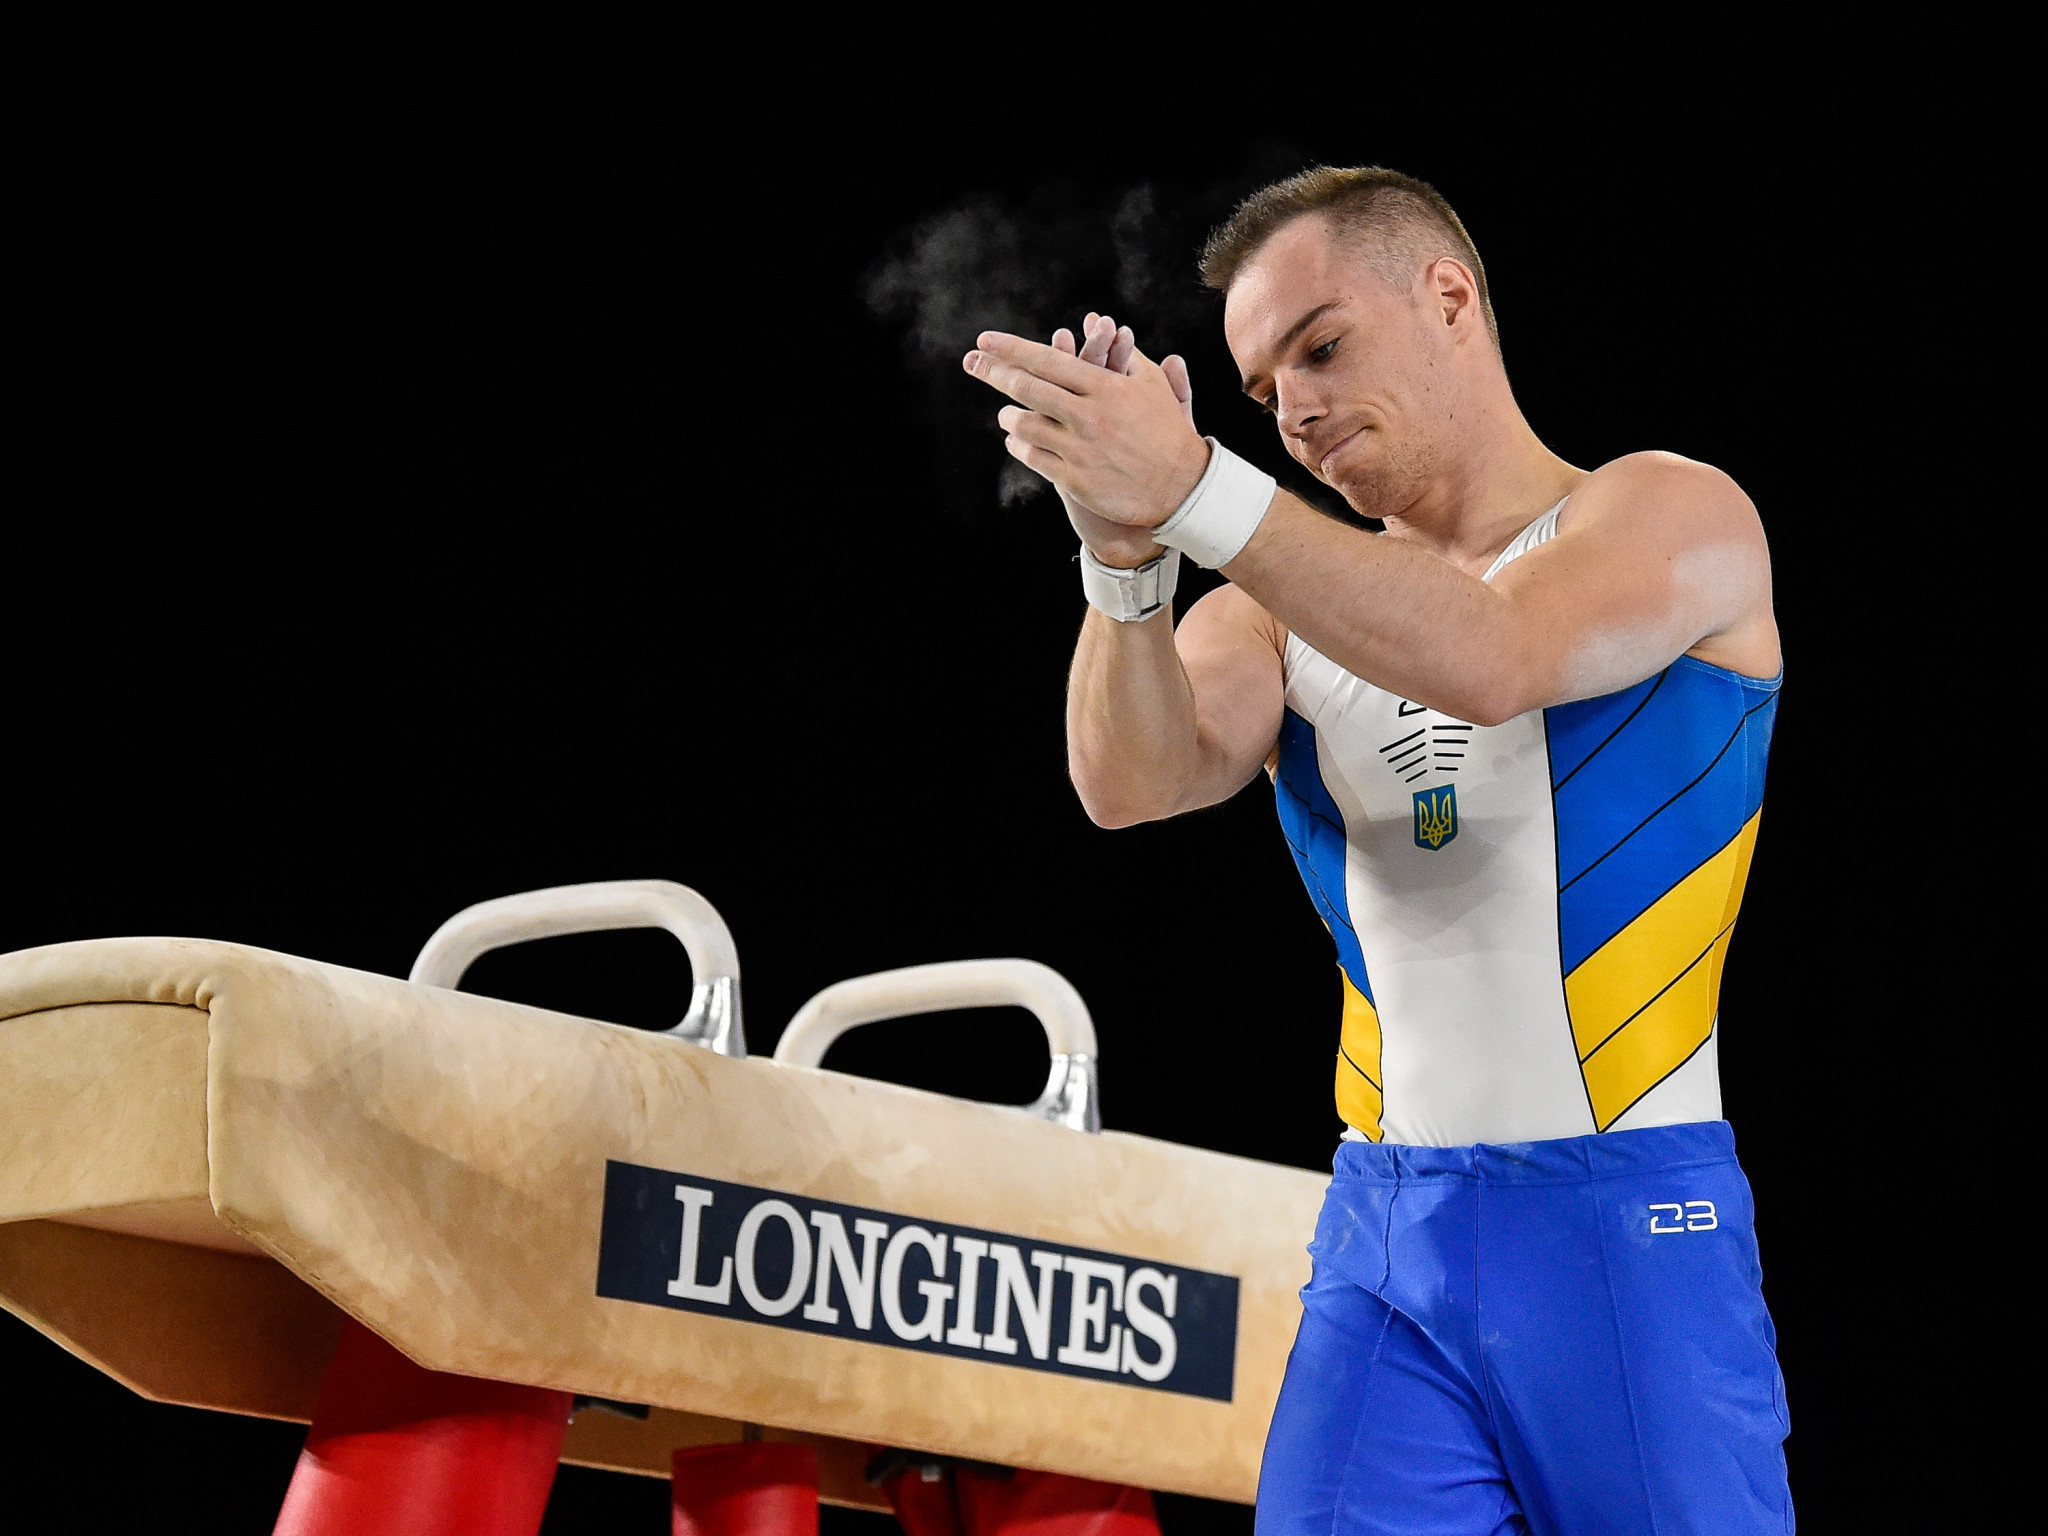 Olympic all-around silver medallist Oleg Verniaiev qualified third on the pommel horse ©Getty Images